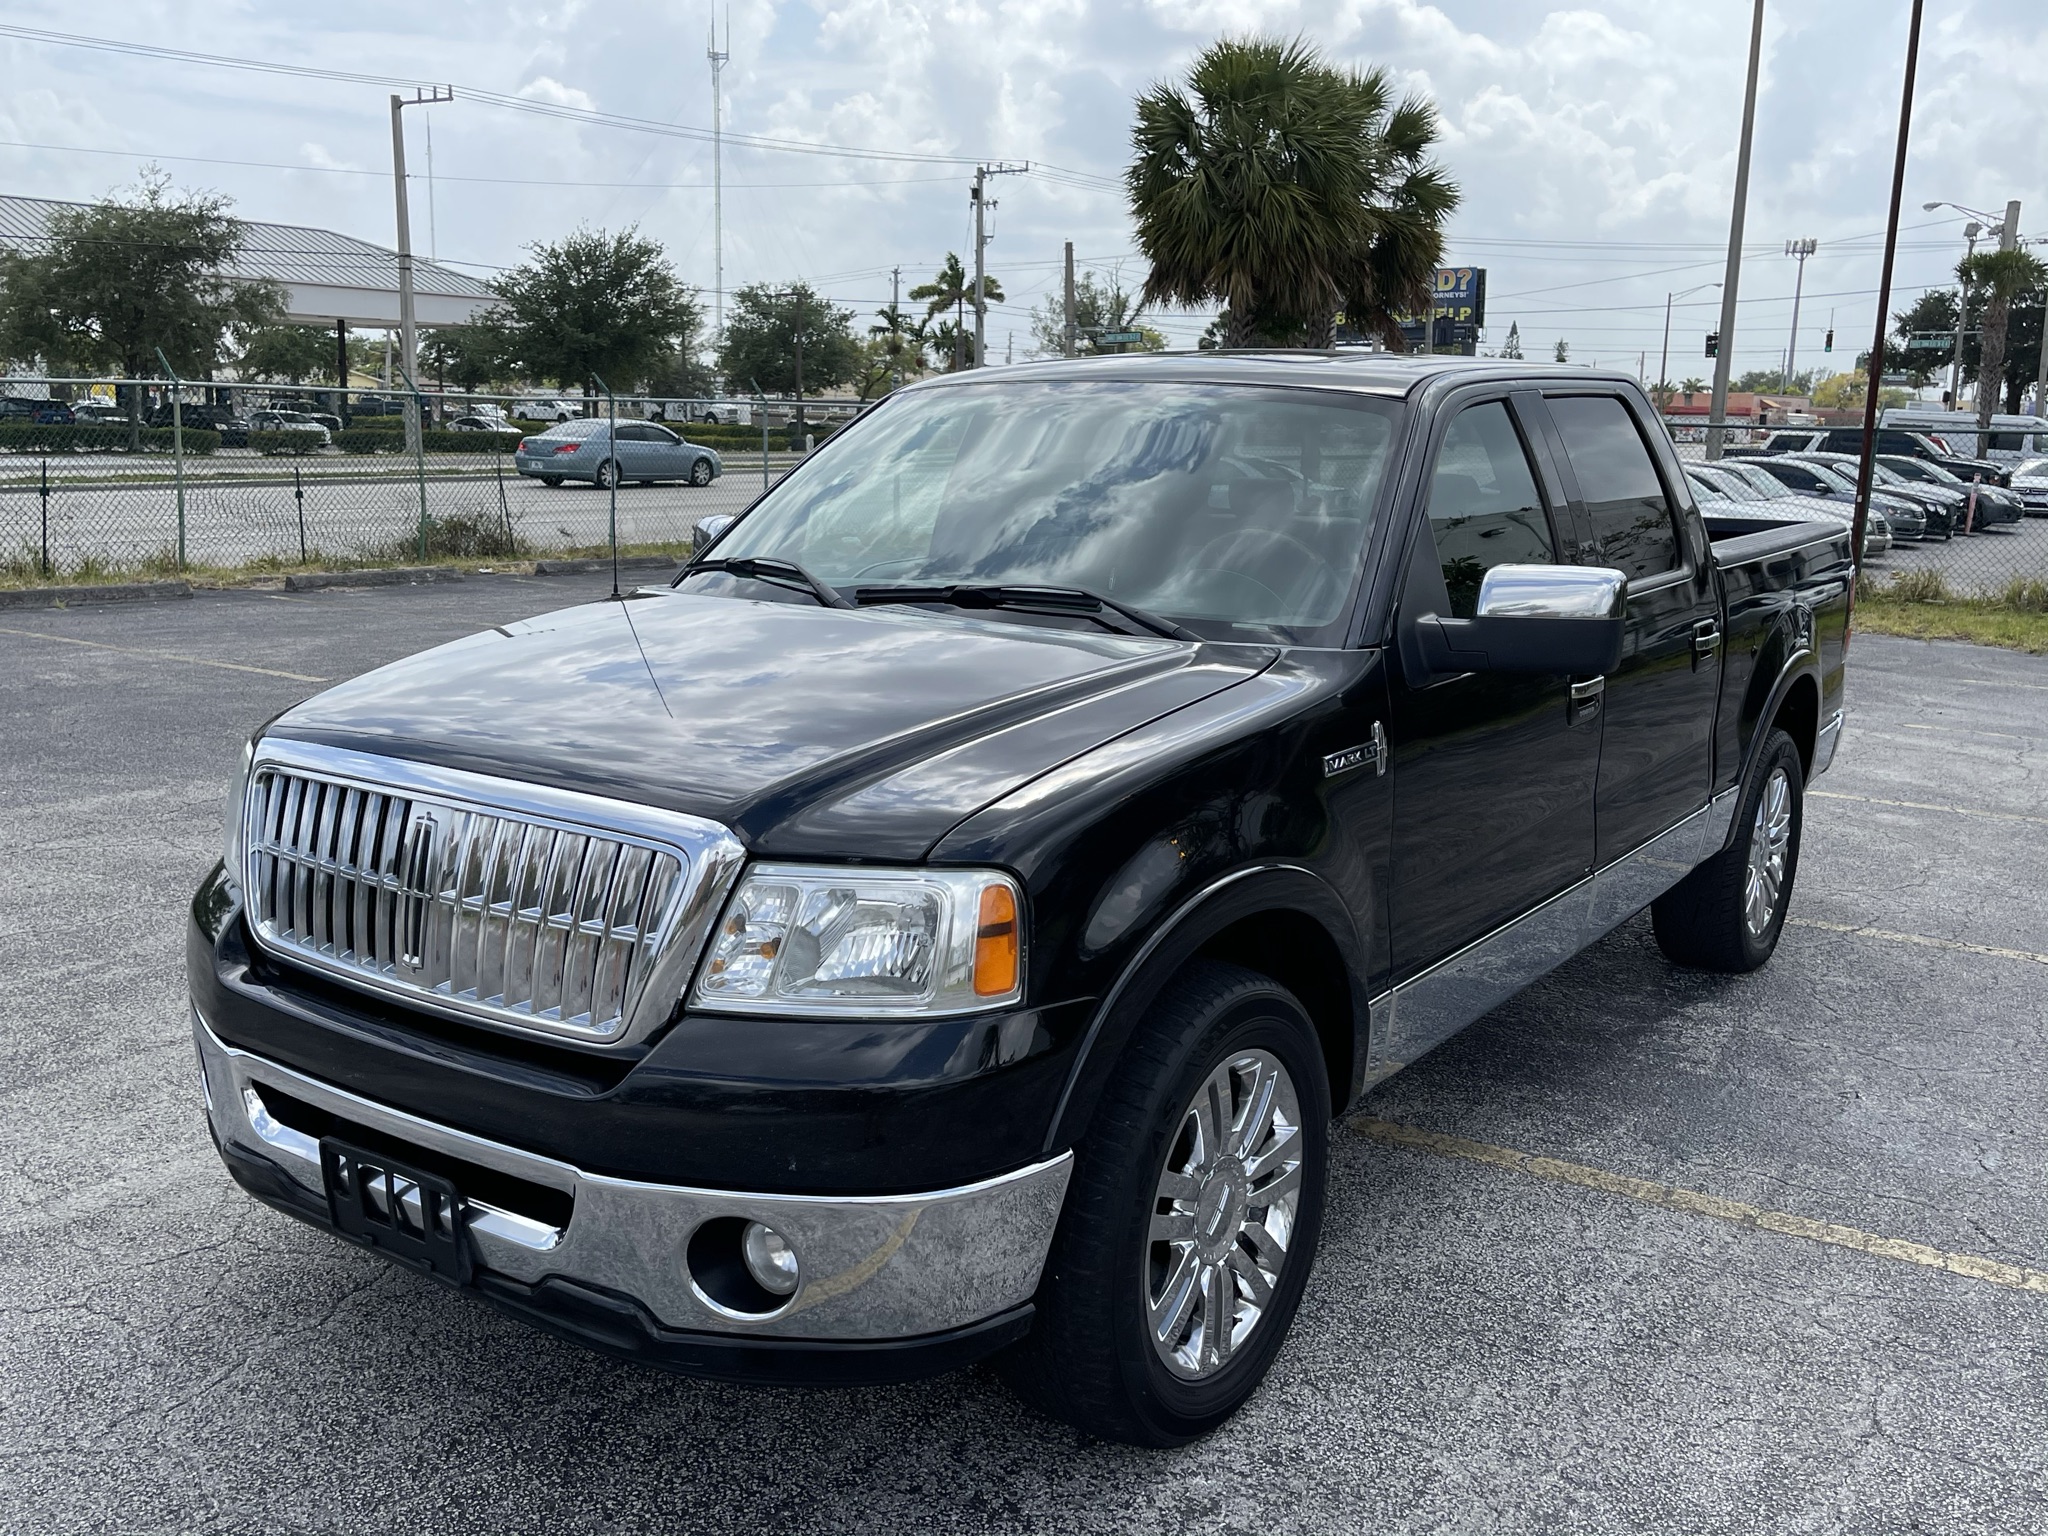 Buy Used 2007 LINCOLN MARK LT for $19 900 from trusted dealer in Brooklyn,  NY!